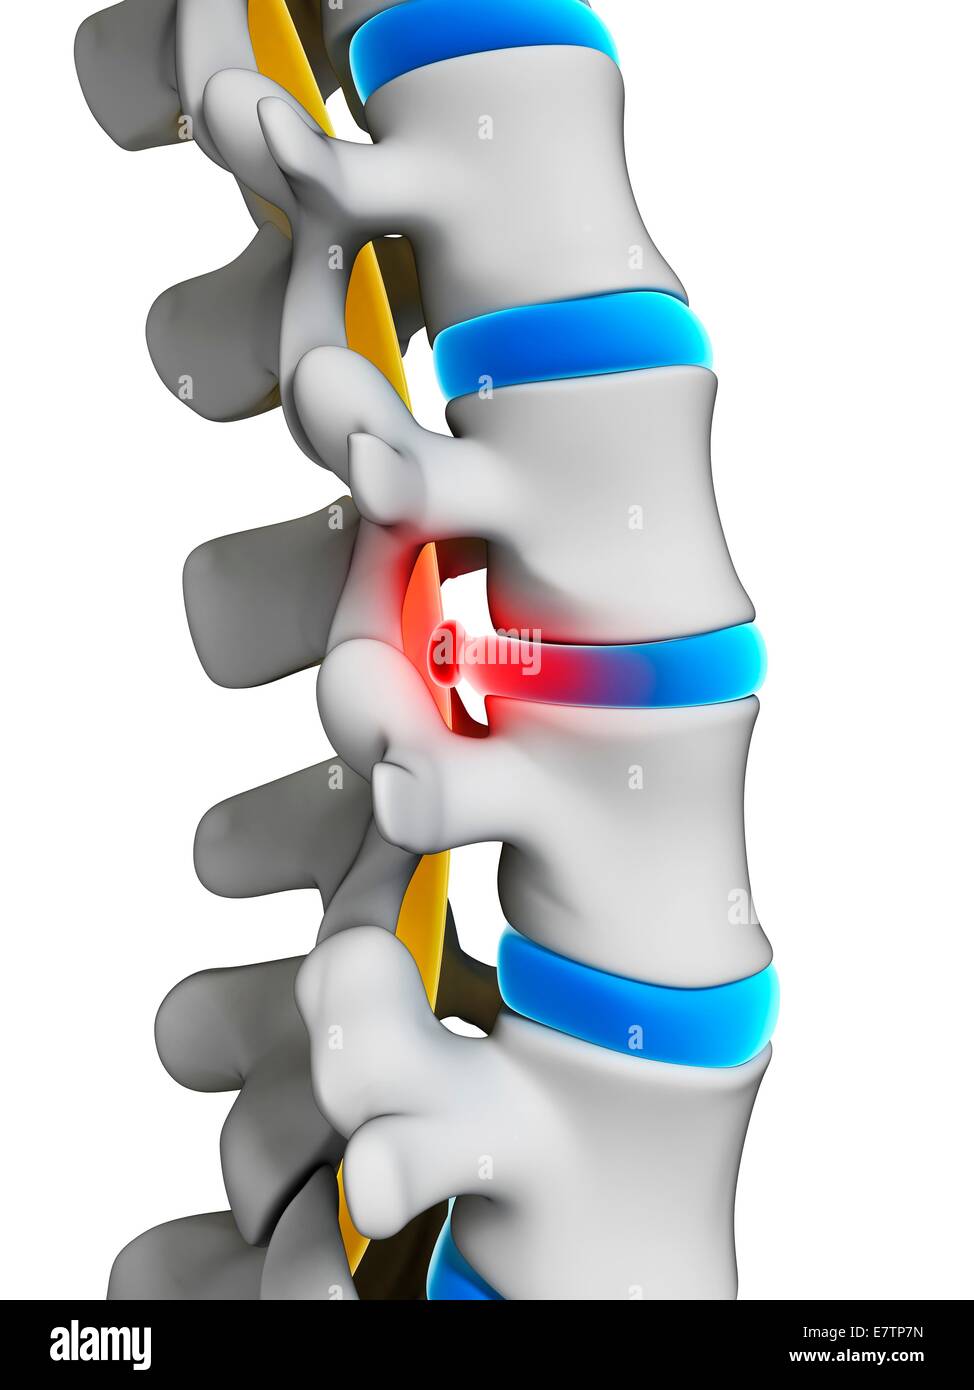 Human spinal disc herniation (slipped disc), computer artwork. Stock Photo